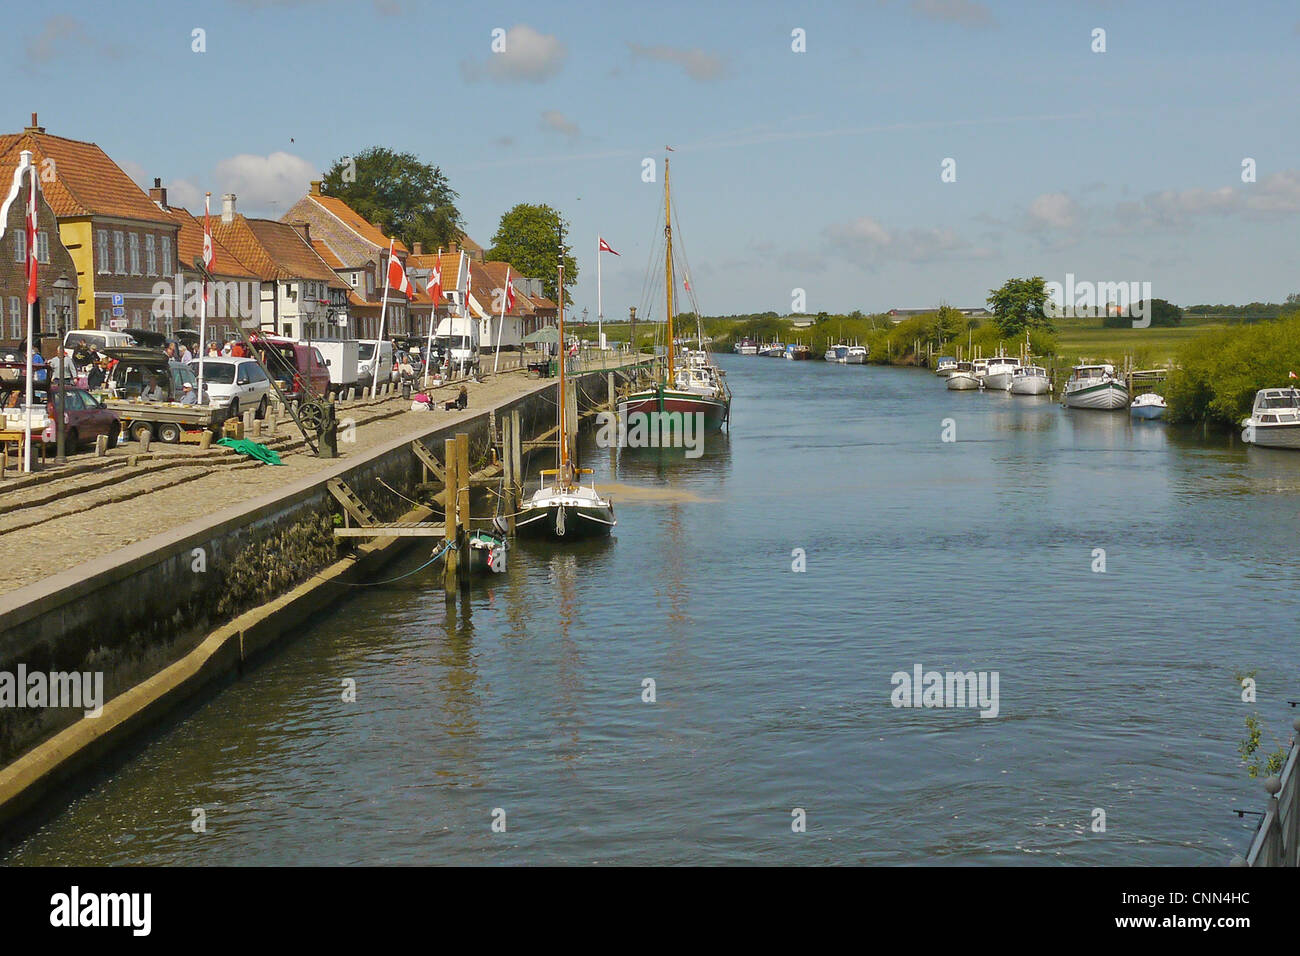 View of river, boats and quay in historic town, Ribe, Jutland, Denmark, may Stock Photo